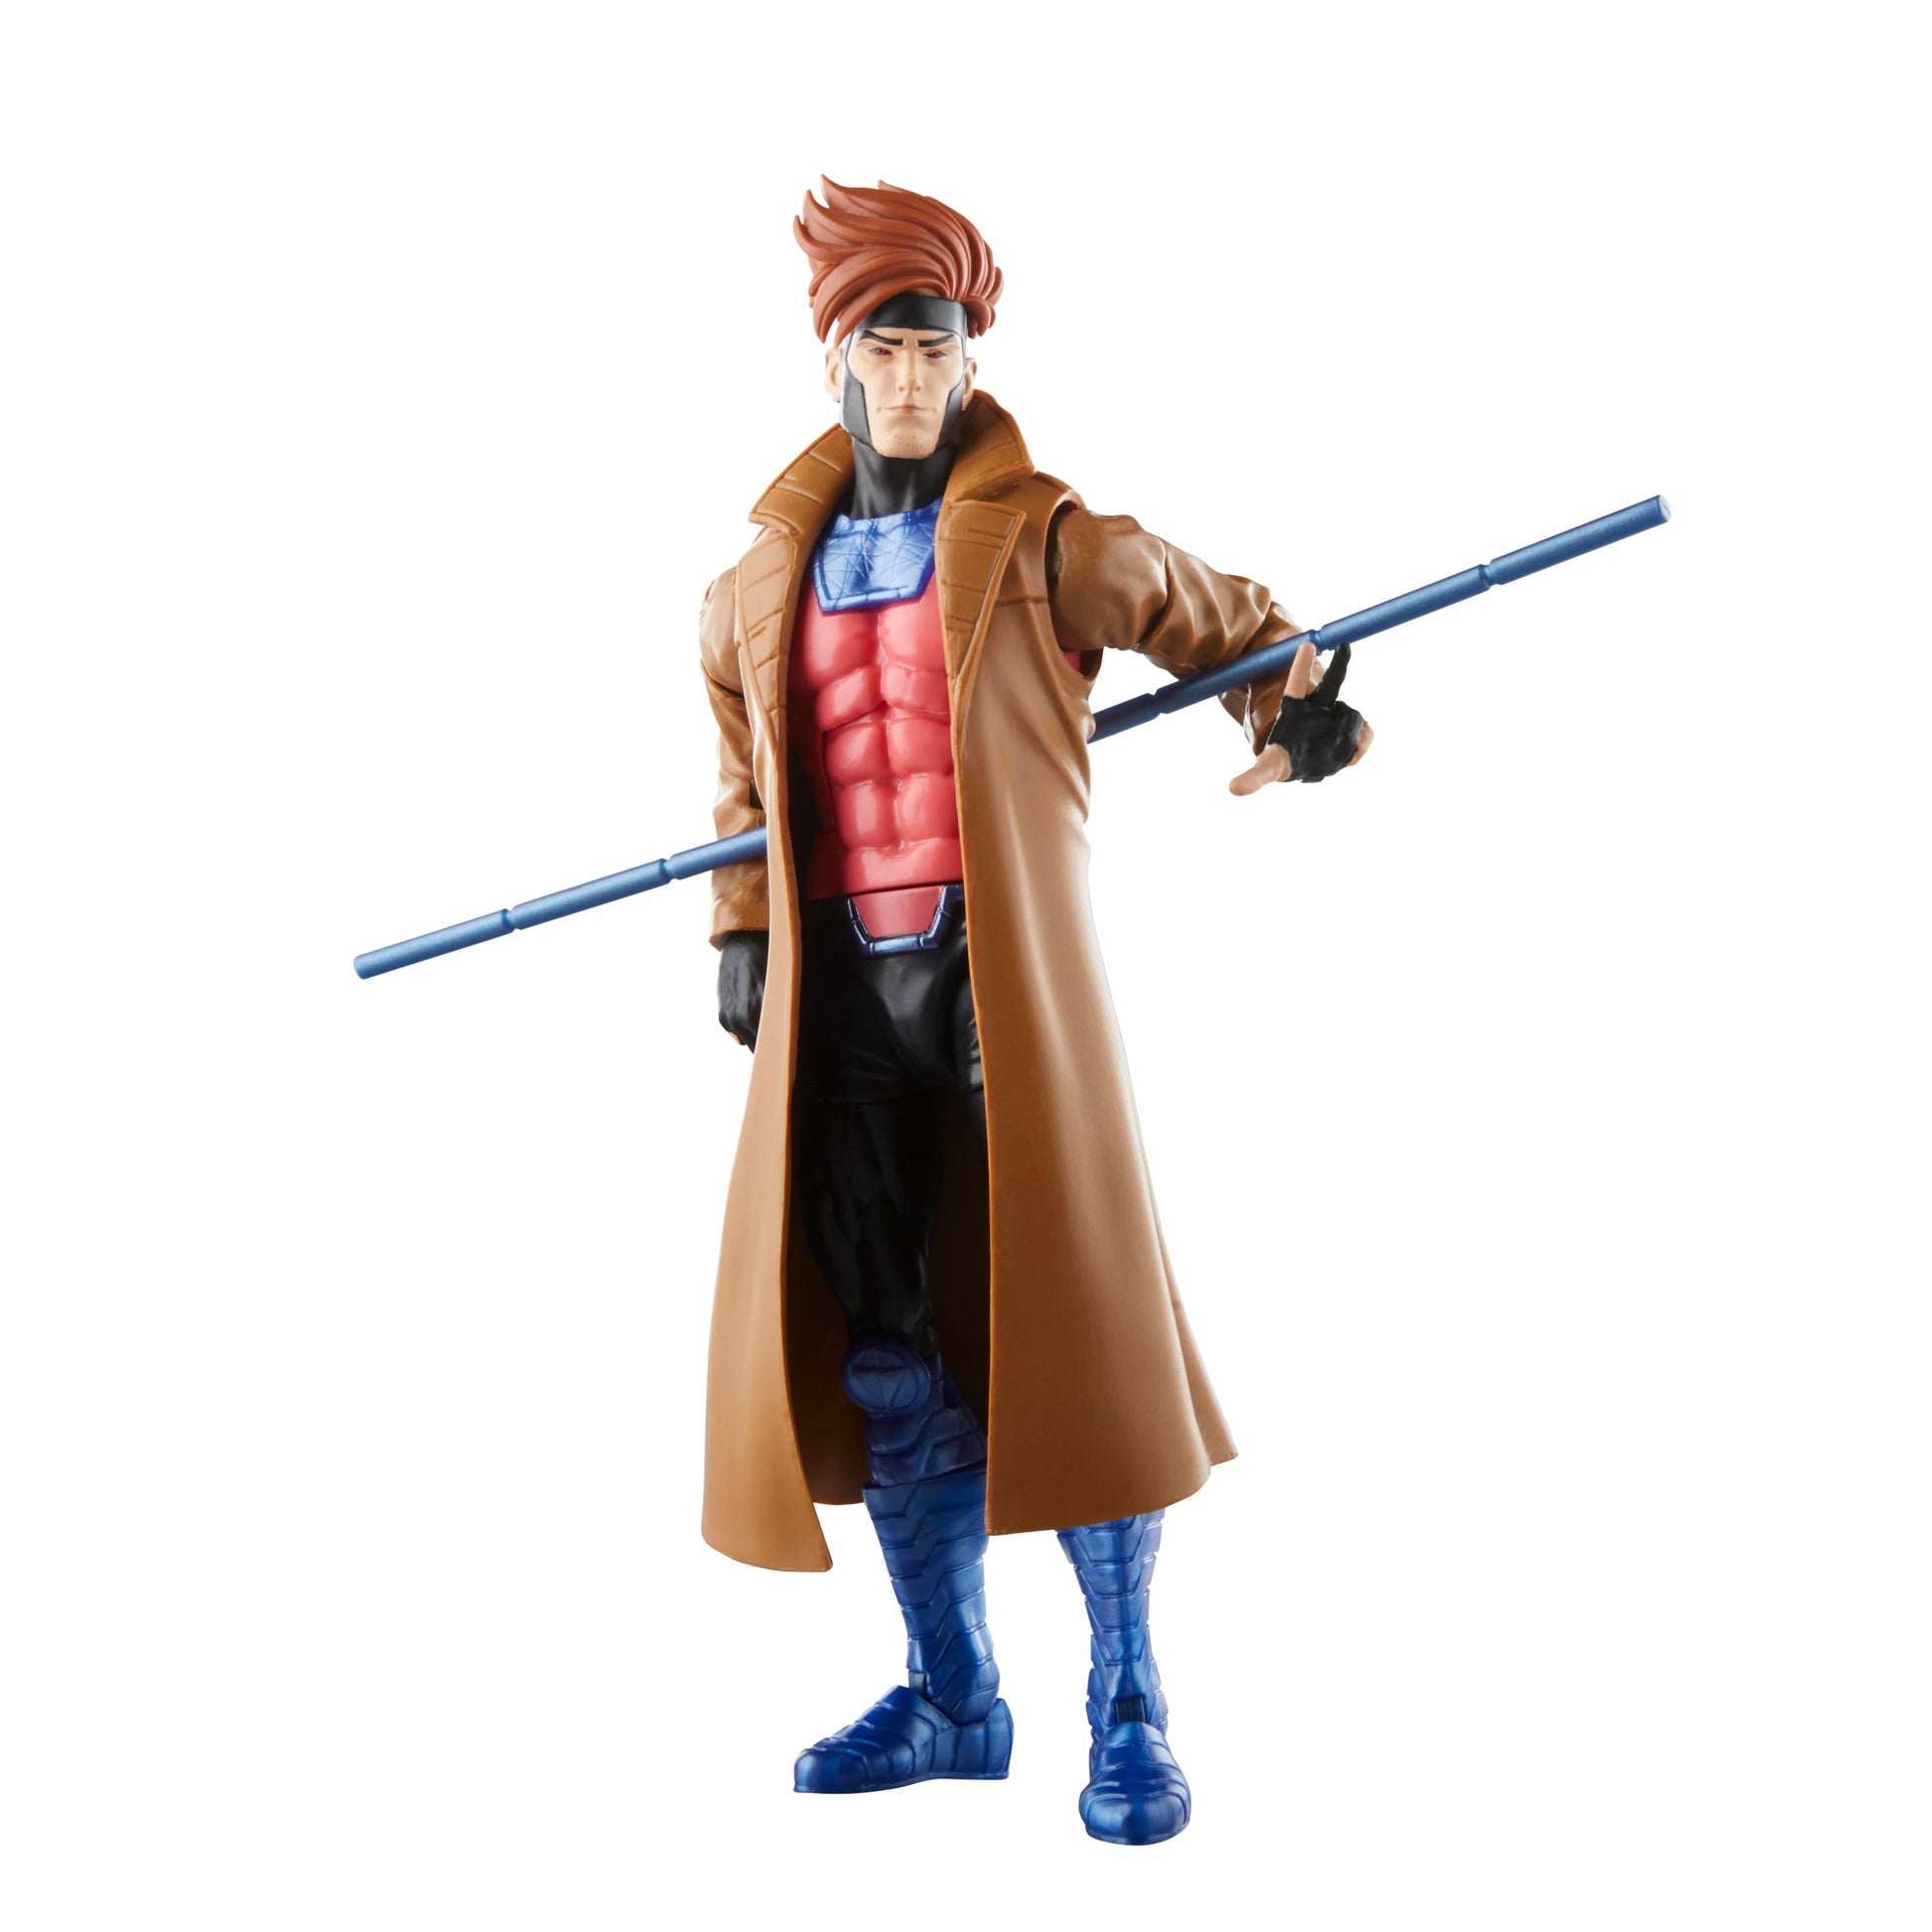 Gambit Action Figure Toy in a pose - Heretoserveyou